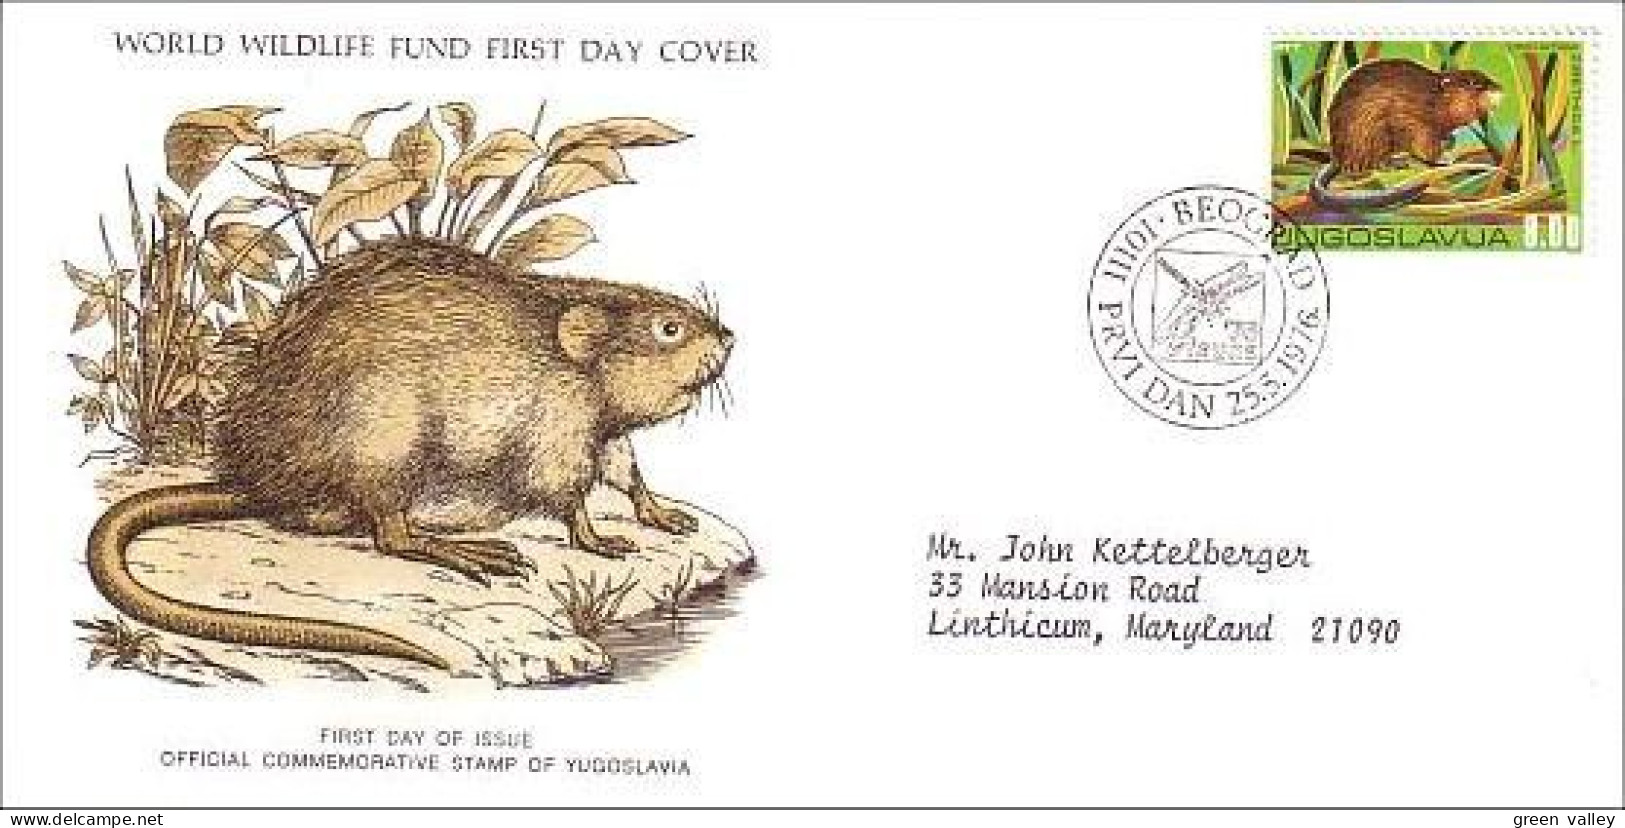 Yougoslavie Rongeur Ondatra Rodent WWF FDC Cover ( A80 99) - Roedores